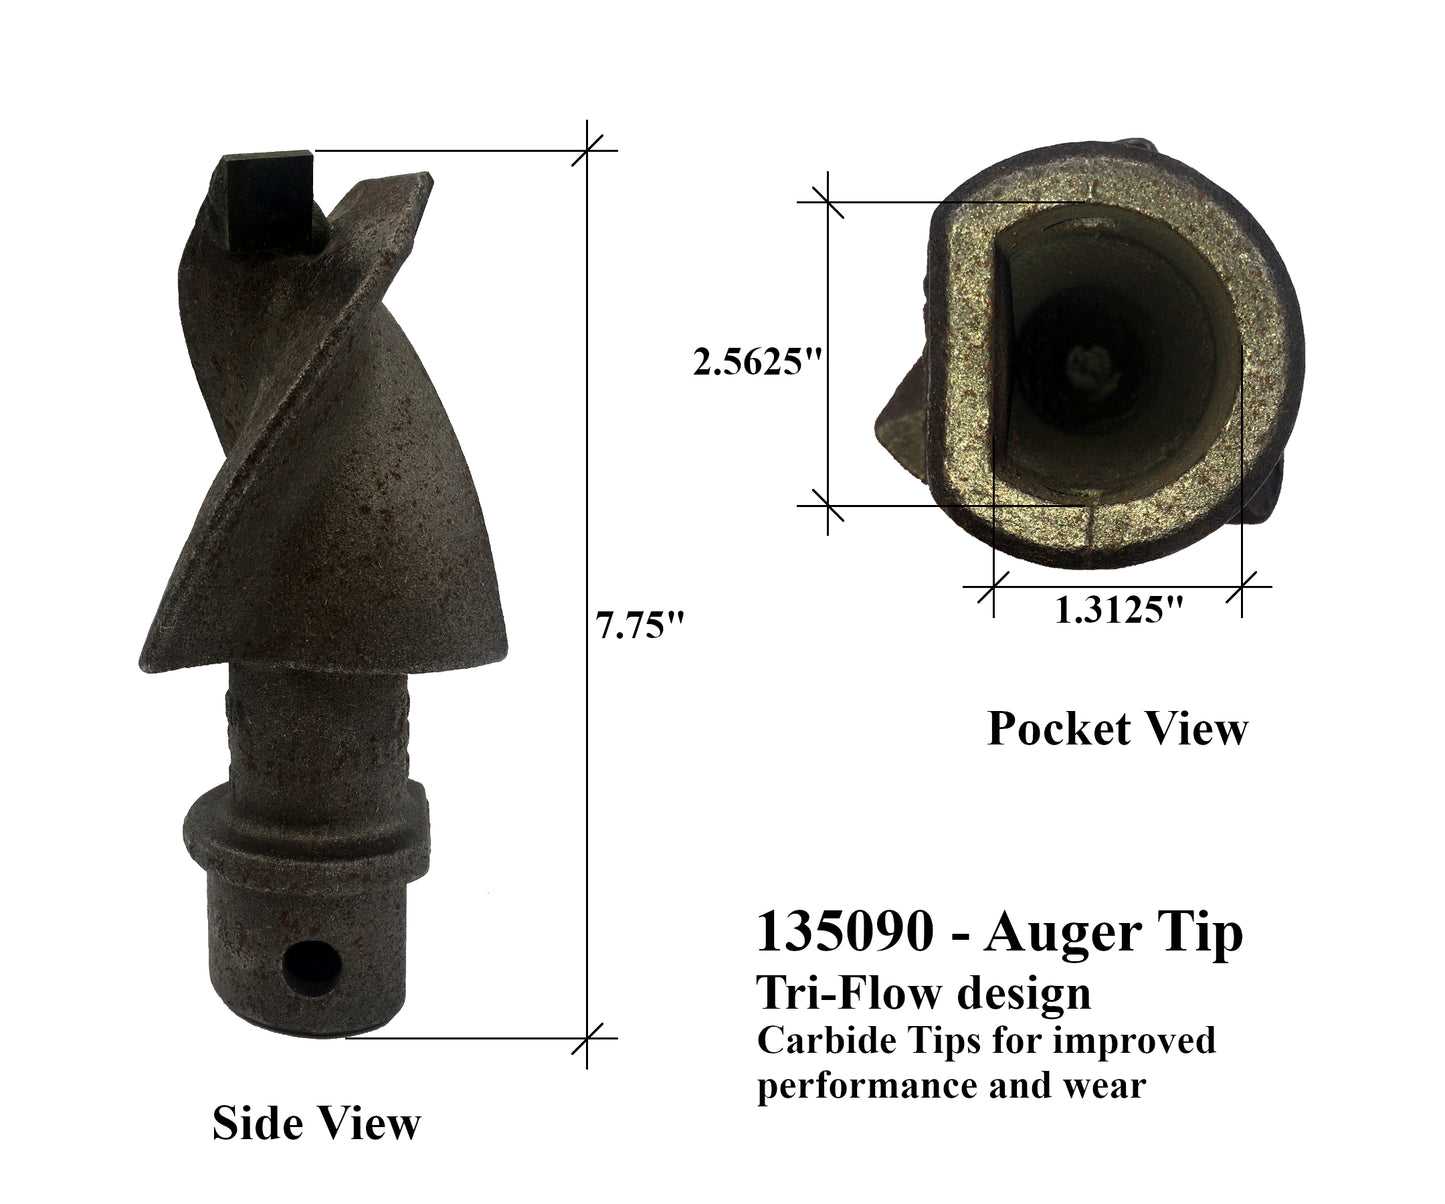 Auger Pilot Tip - 135090 (TF-350C) - fits Pengo Aggressor and Other Augers